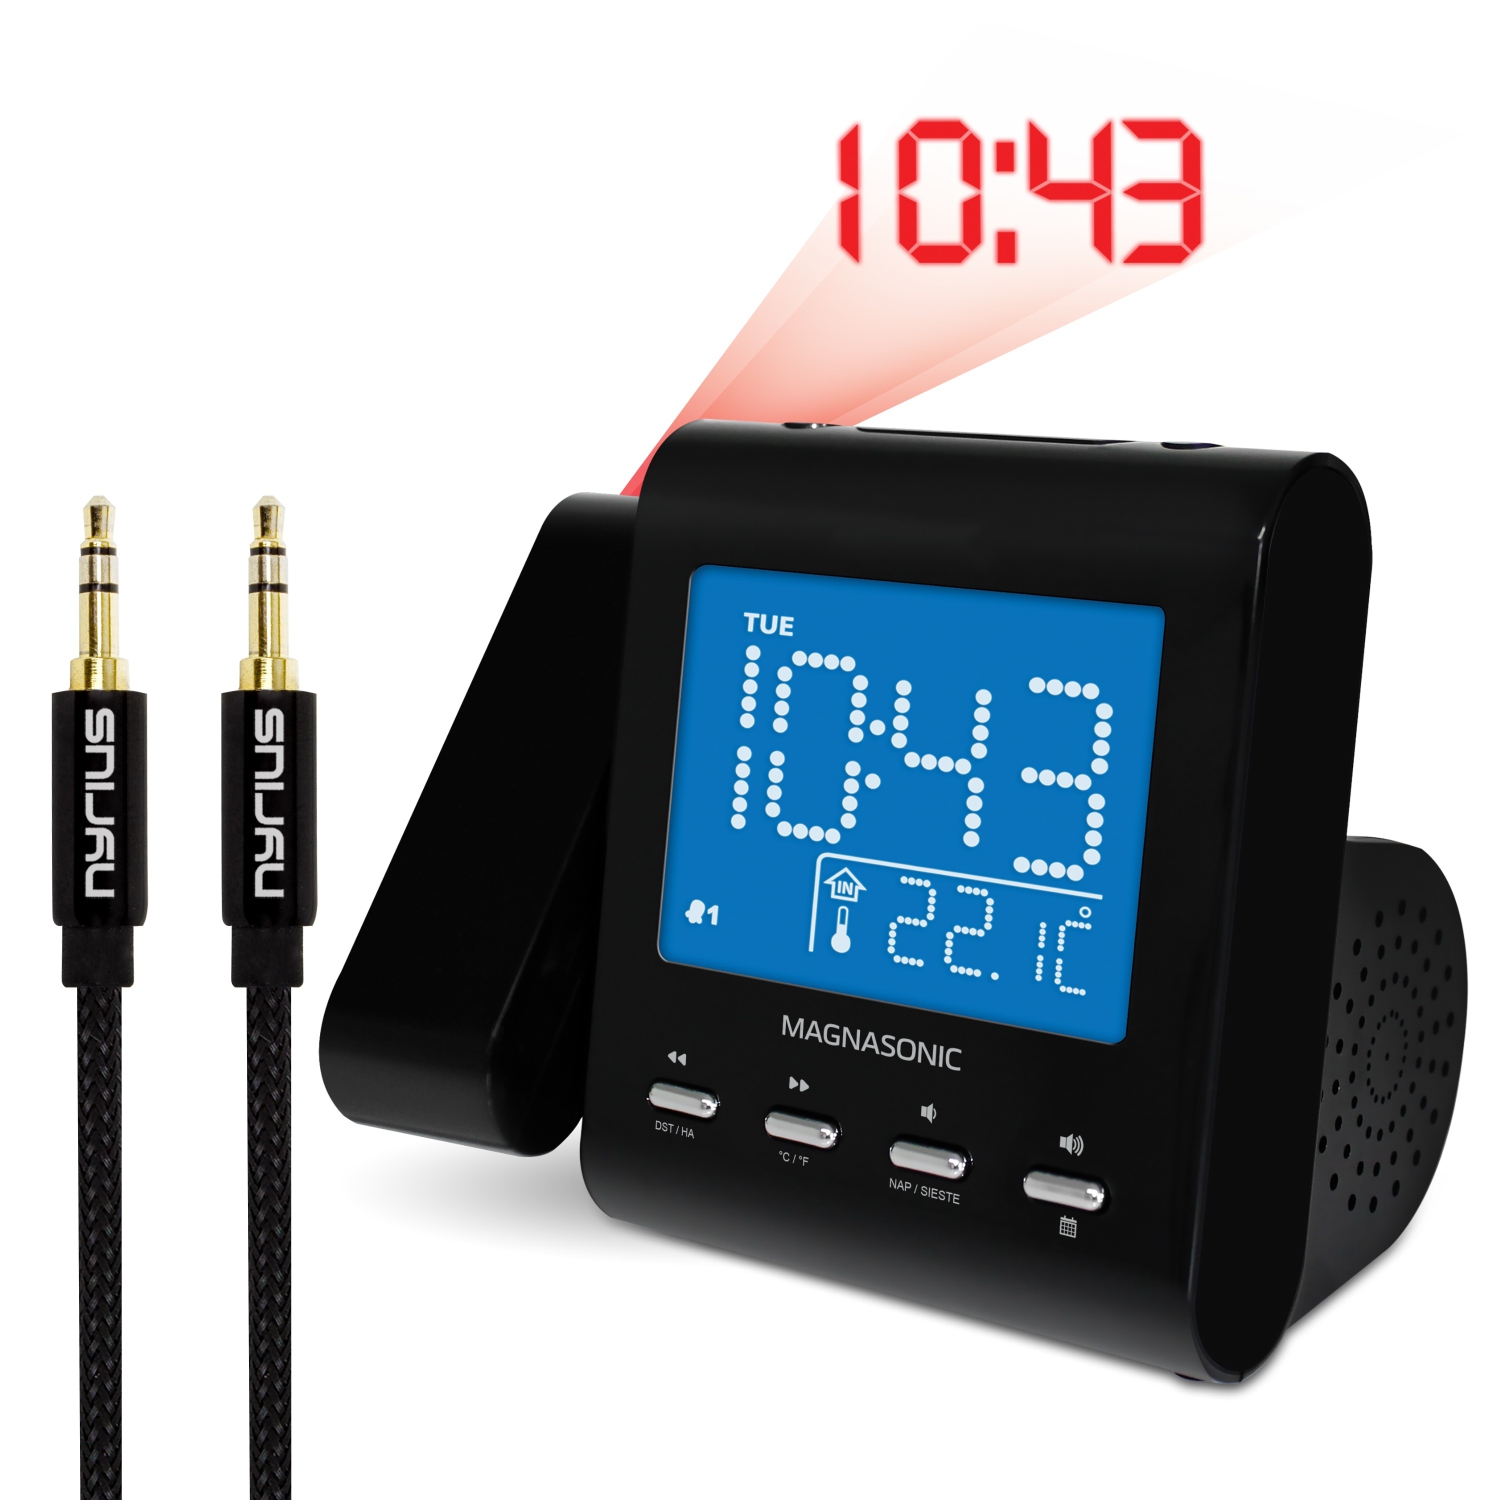 Magnasonic Projection Alarm Clock with AM/FM Radio, Battery Backup & Bonus 3.5mm Aux Stereo Cable